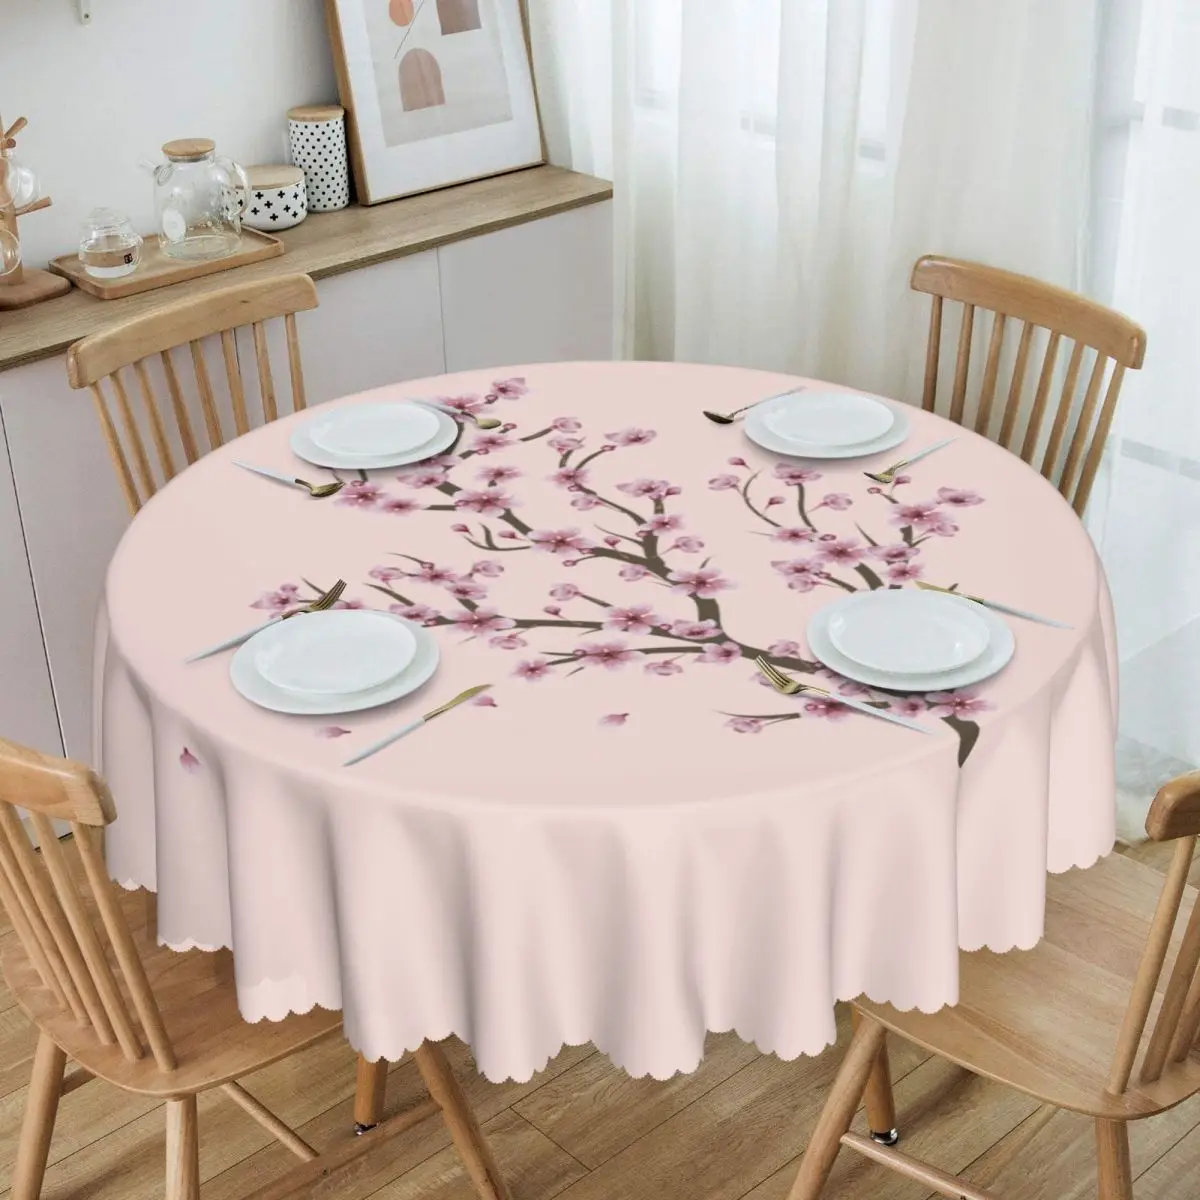 

Blooming Sakura Branch Tablecloth Round Waterproof Cherry Blossom Japanese Flower Table Cover Cloth for Party 60 inch